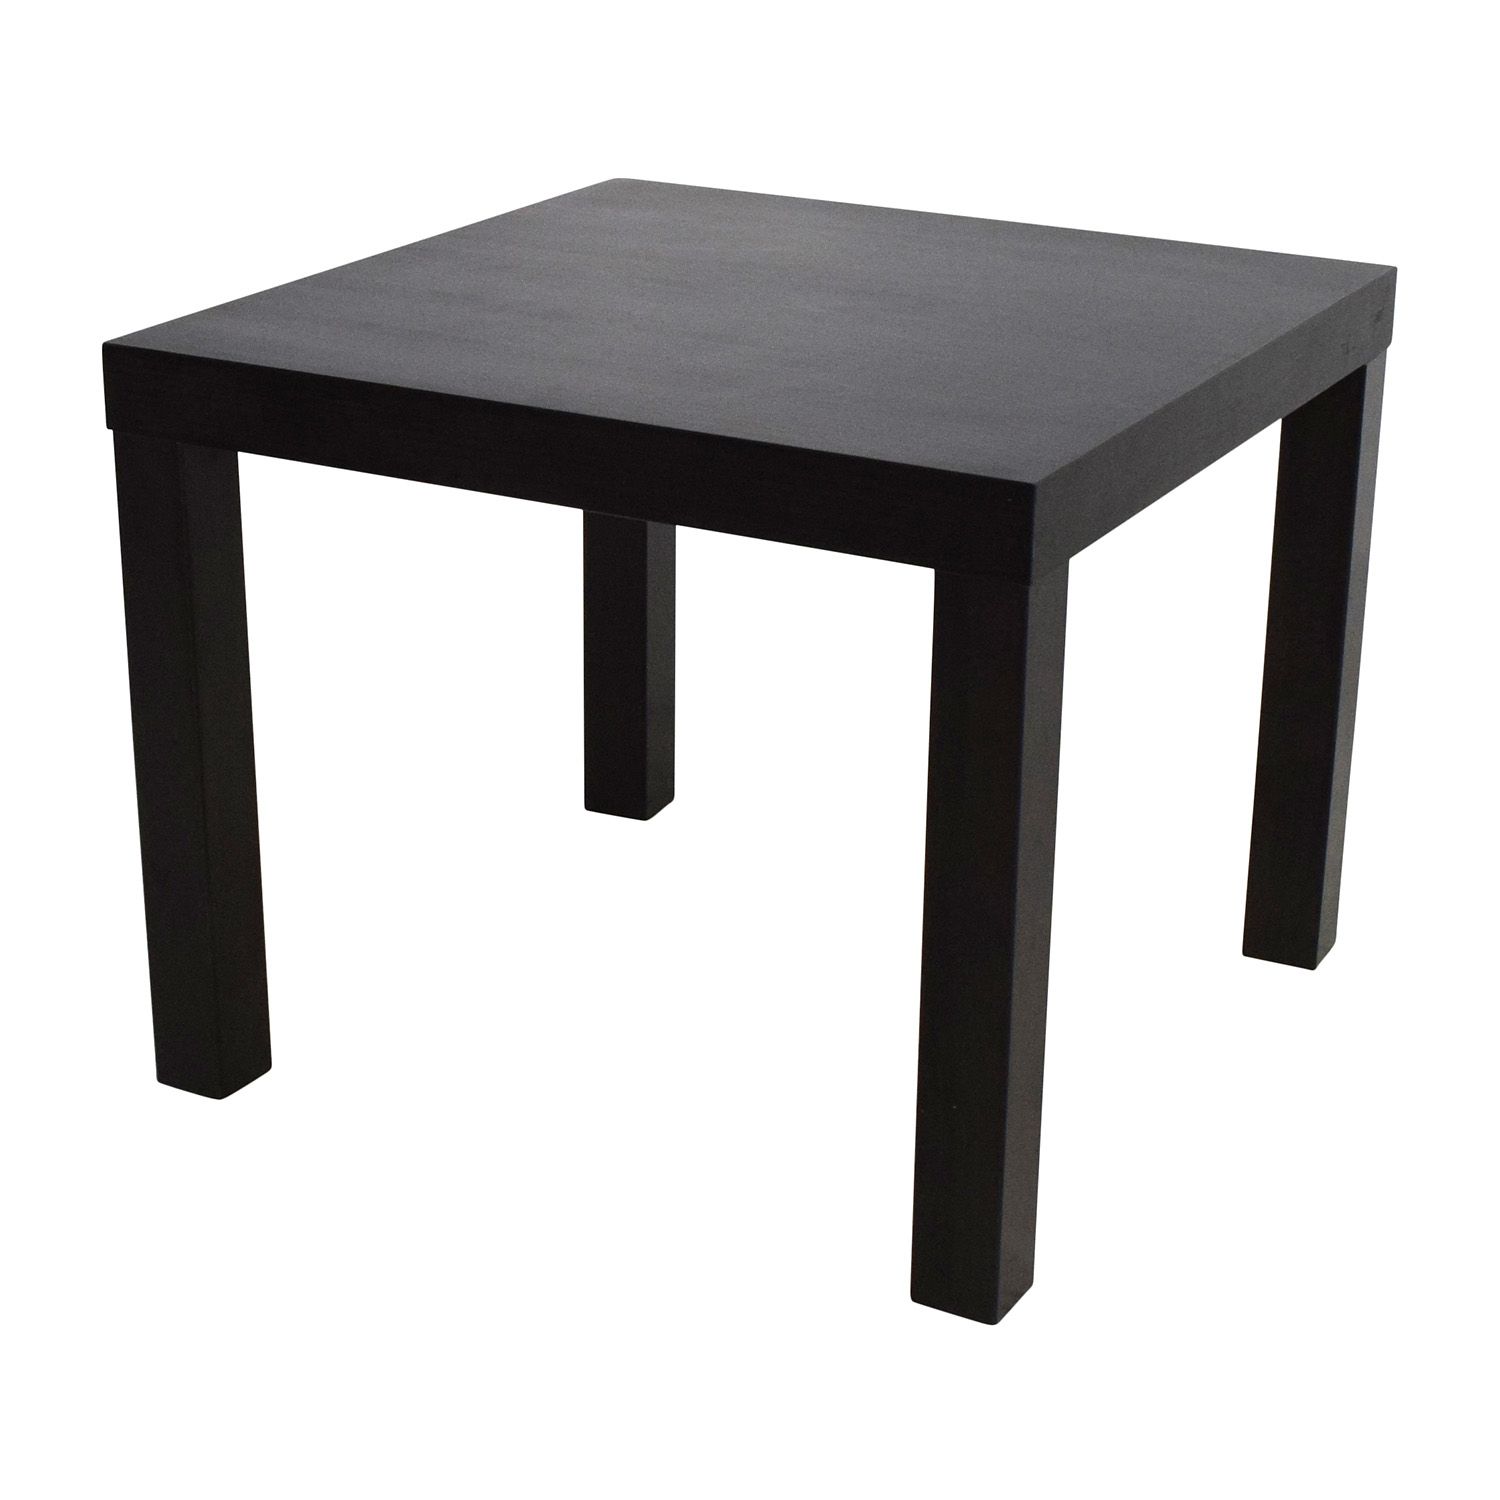 80% Off – Black Coffee Table / Tables Regarding Black And White Coffee Tables (View 14 of 15)